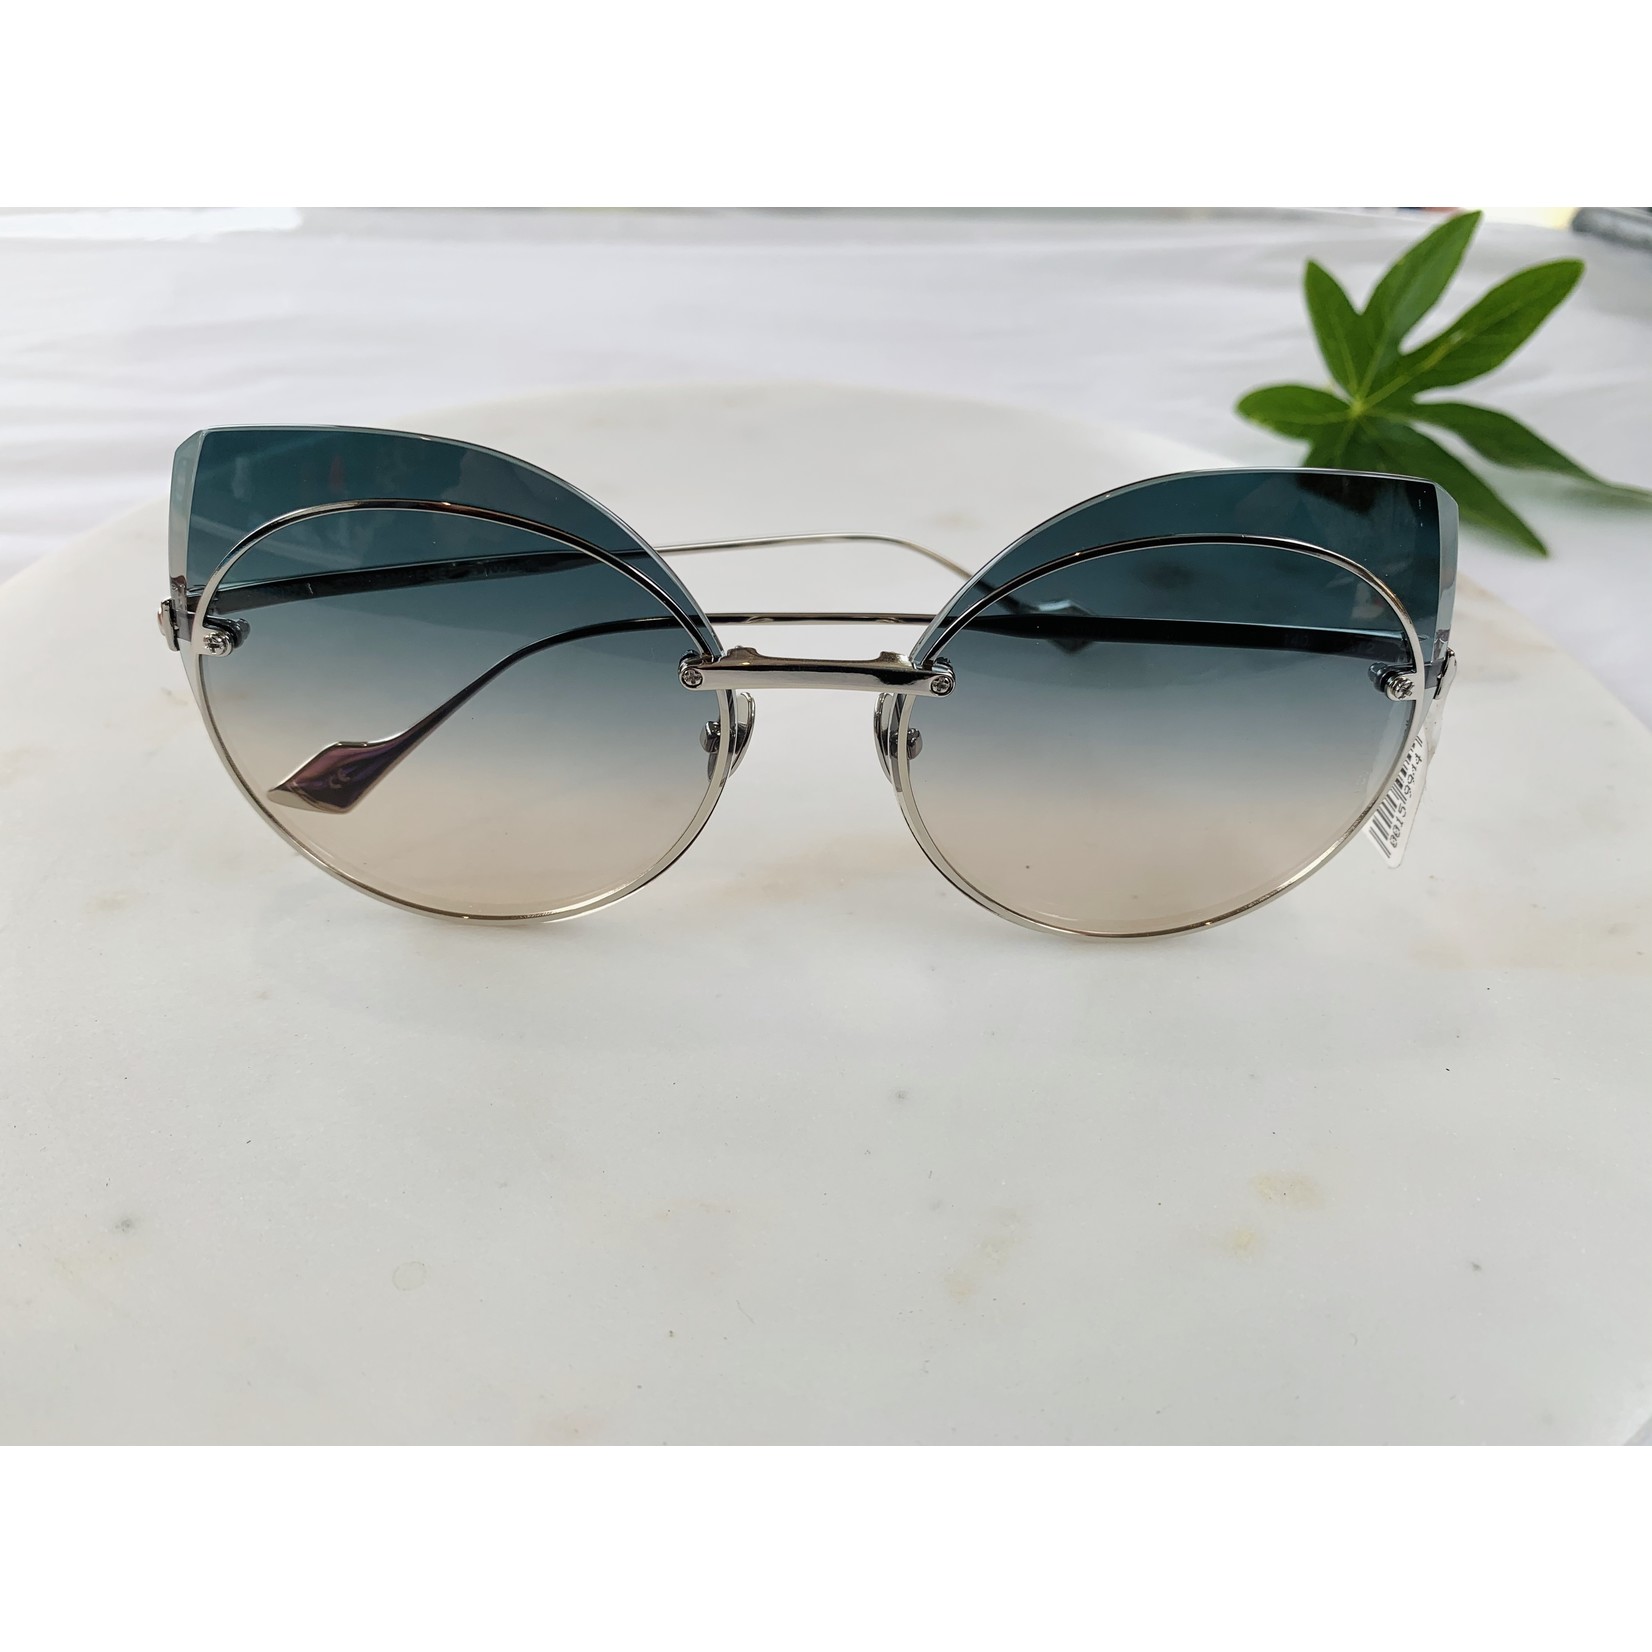 Made in Italy Sunglasses